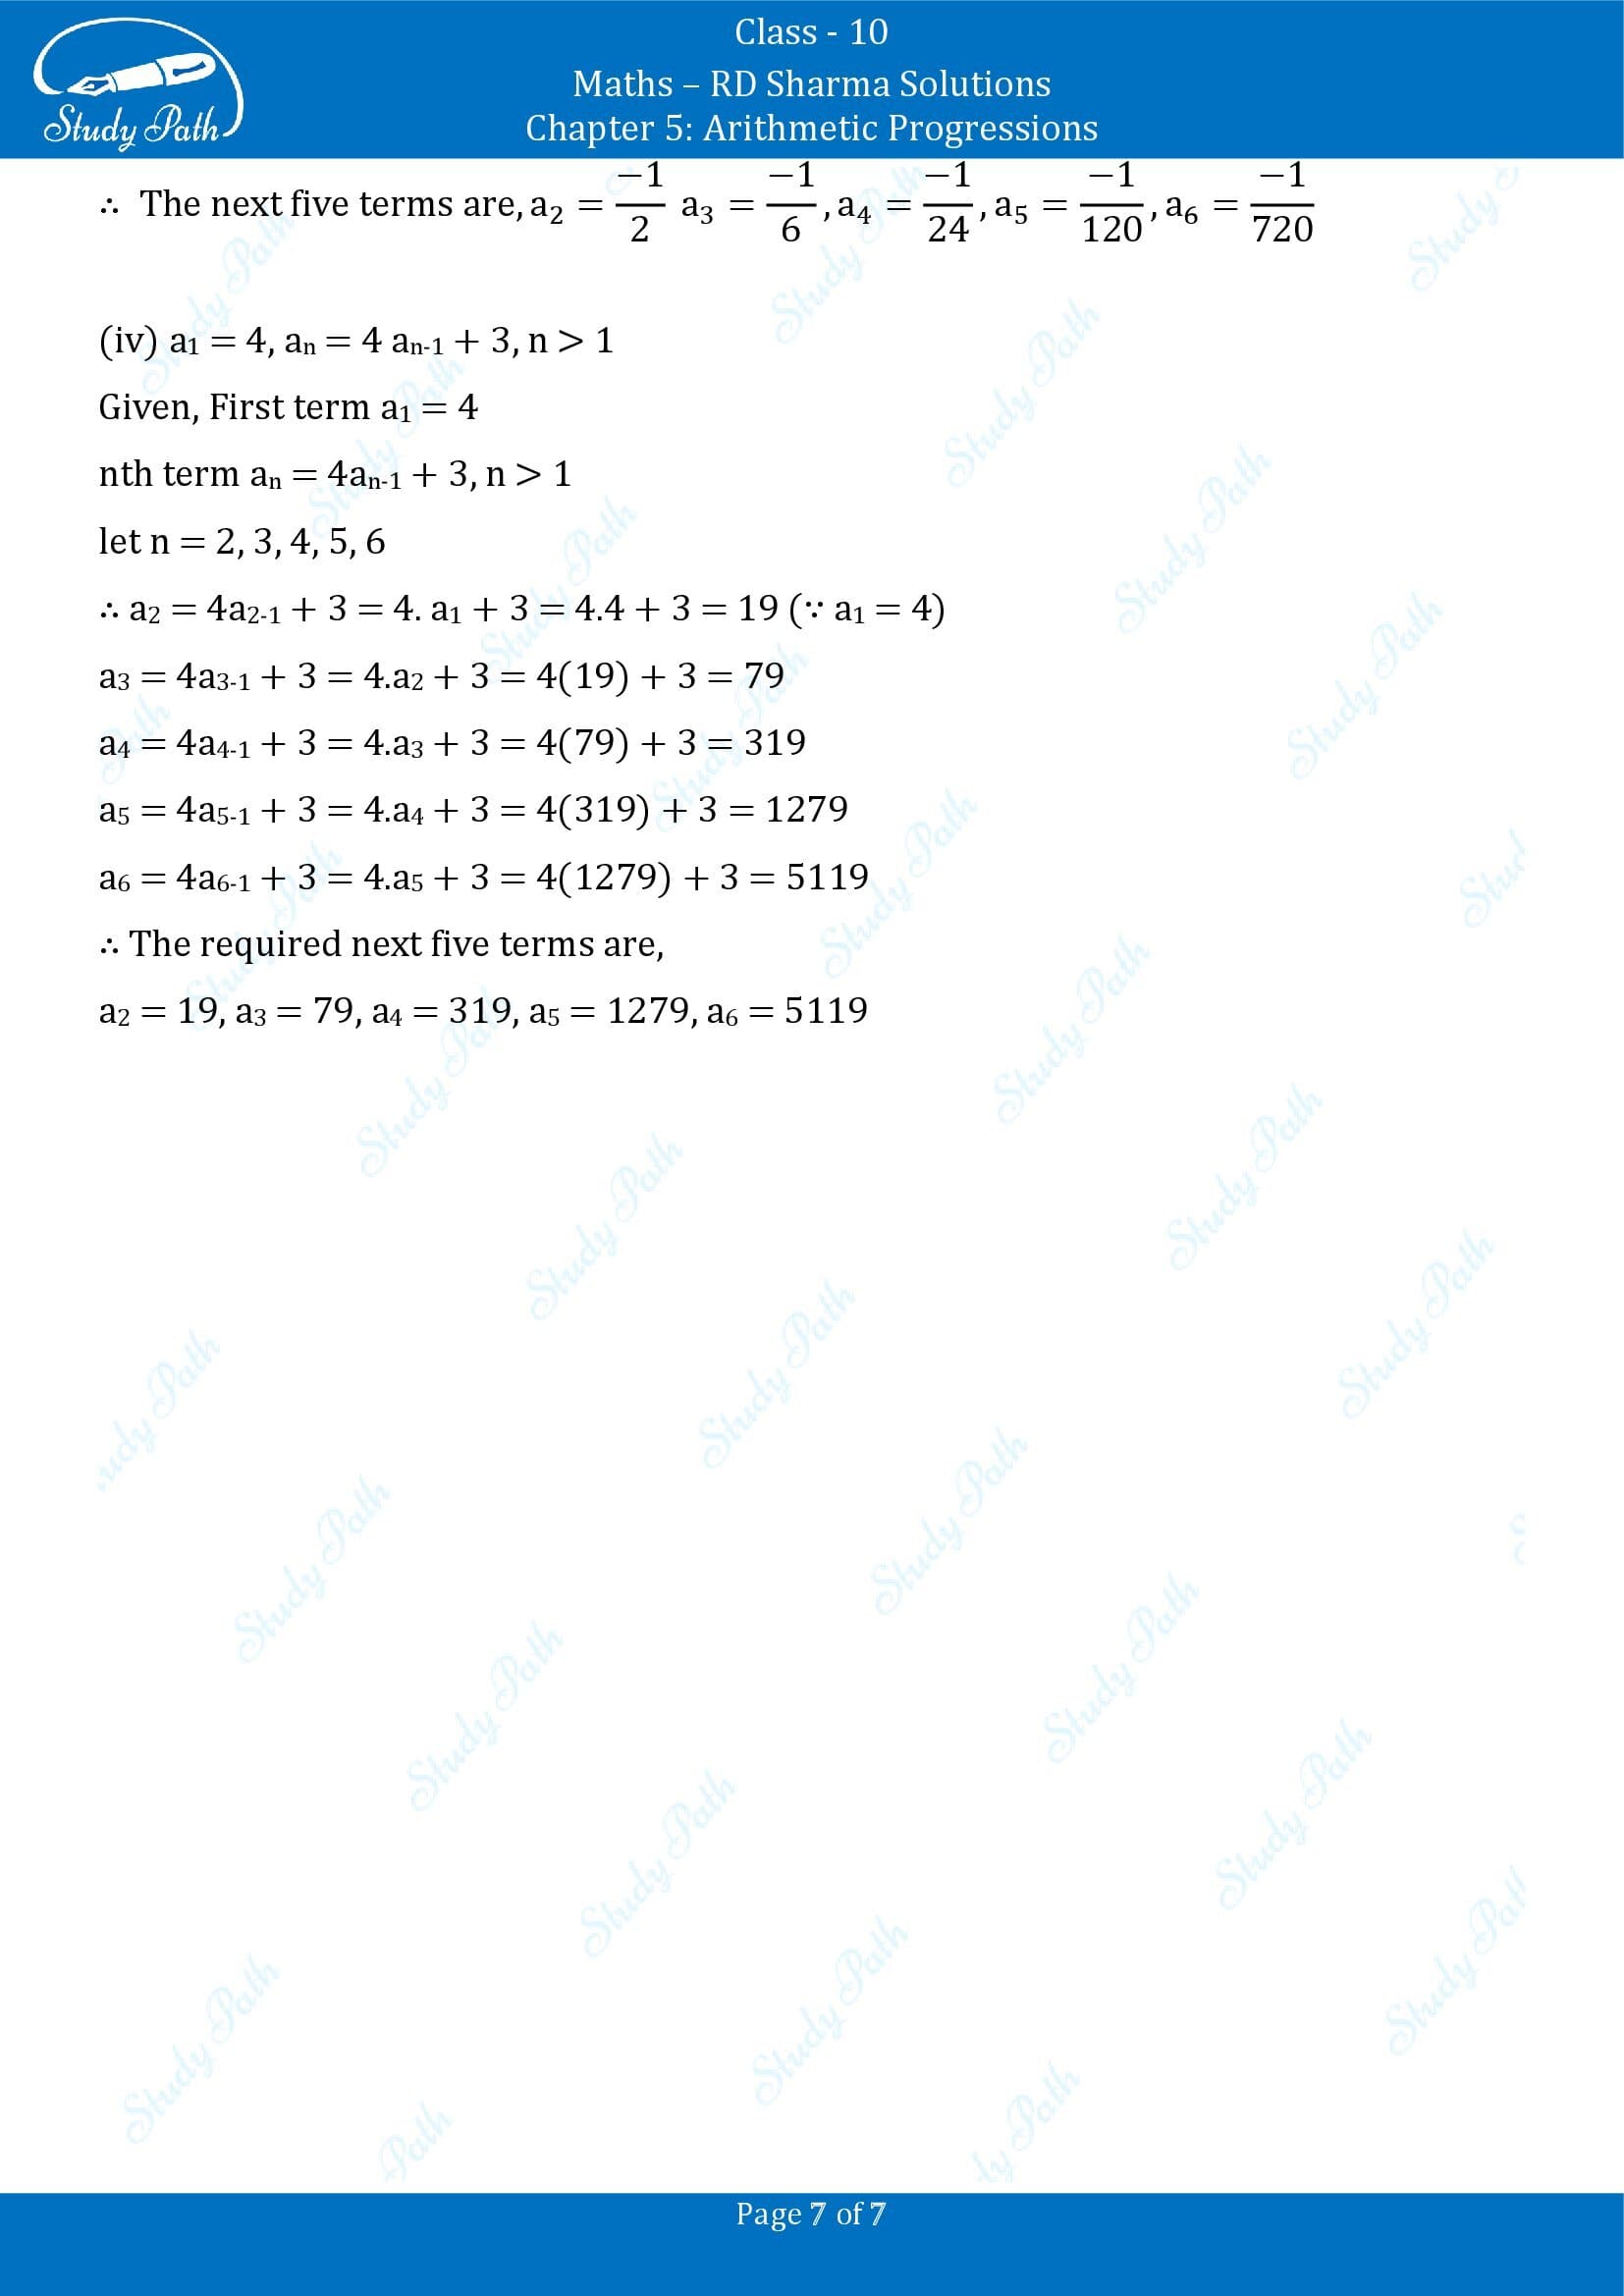 RD Sharma Solutions Class 10 Chapter 5 Arithmetic Progressions Exercise 5.1 00007